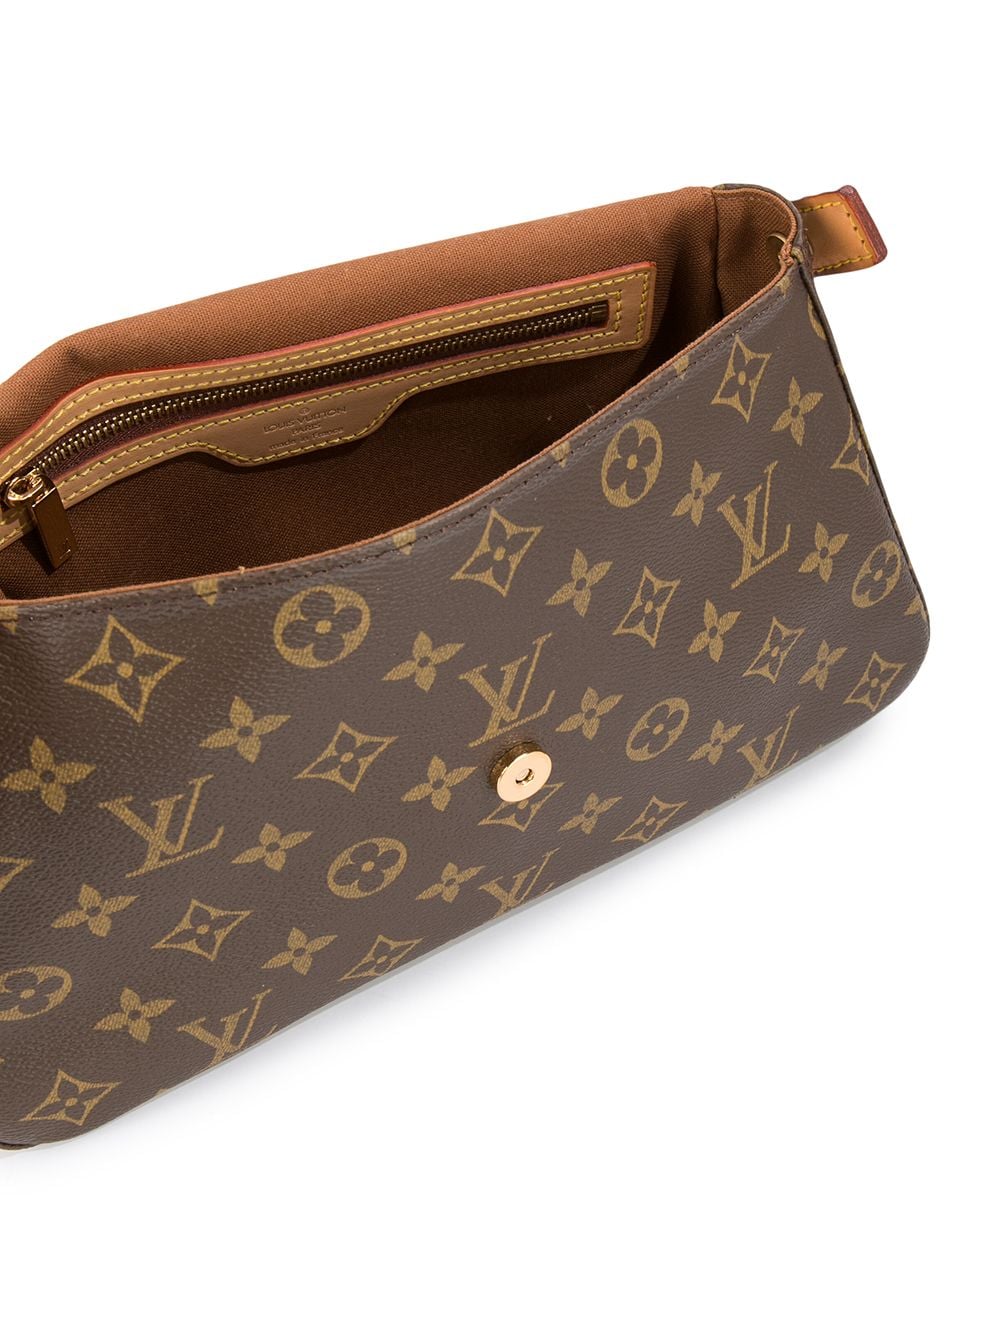 Louis Vuitton 2003 pre-owned Looping MM Shoulder Bag - Farfetch